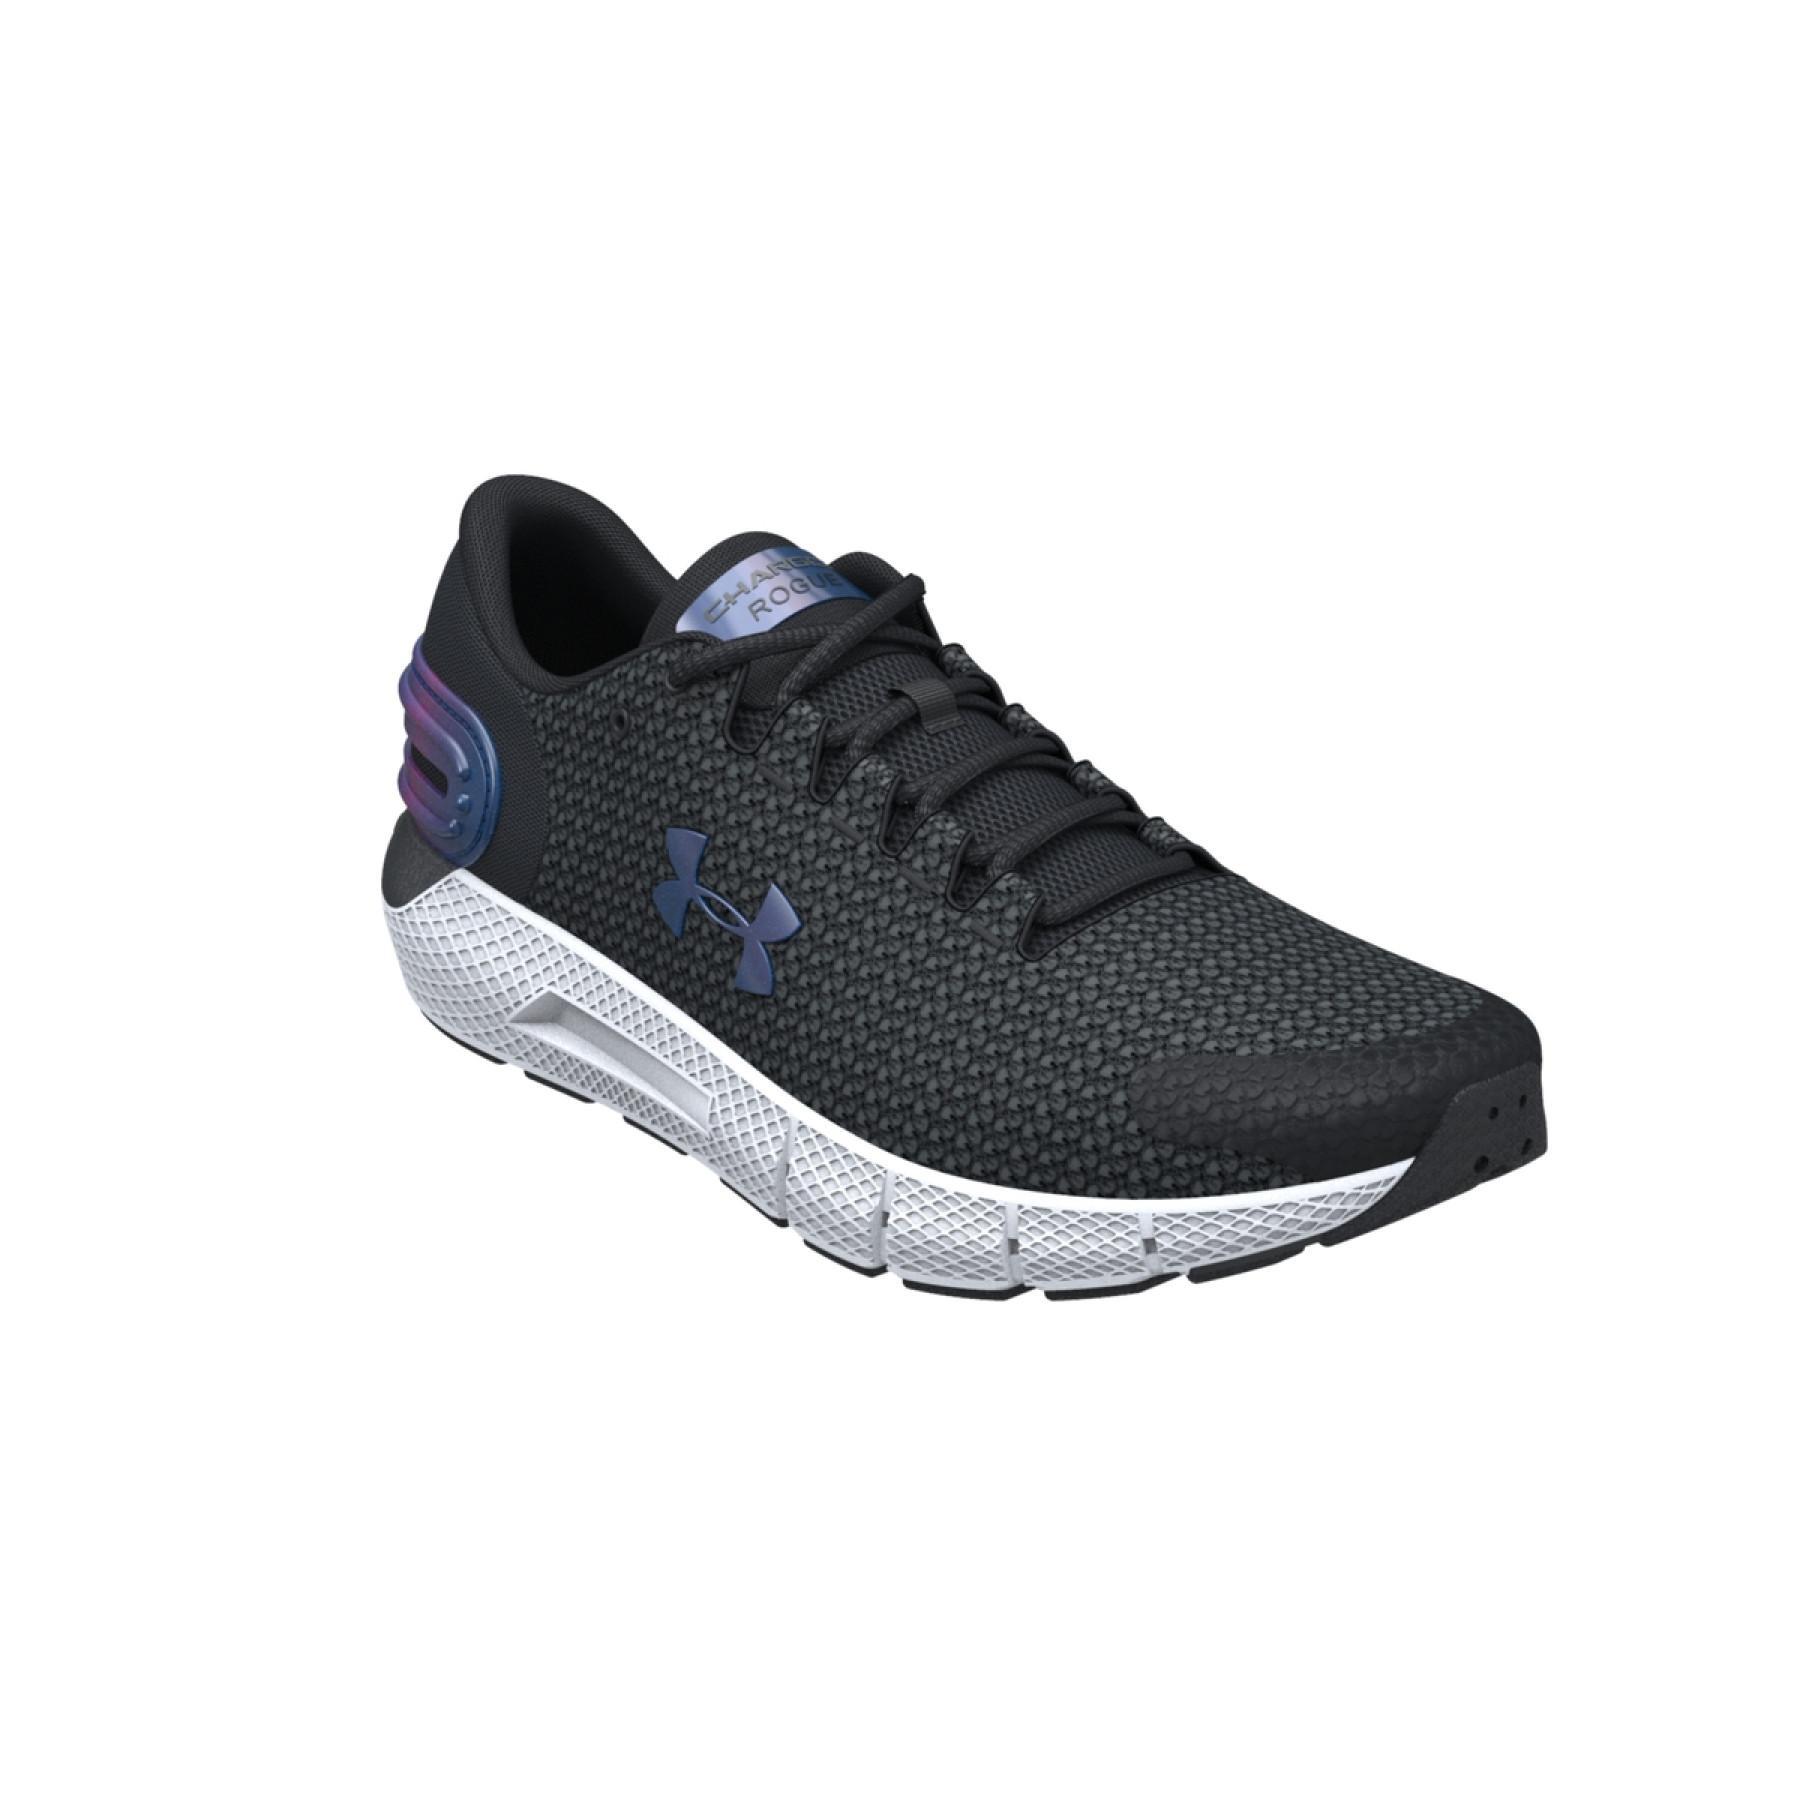 Women's running shoes Under Armour Charged Rogue 2.5 Colorshift